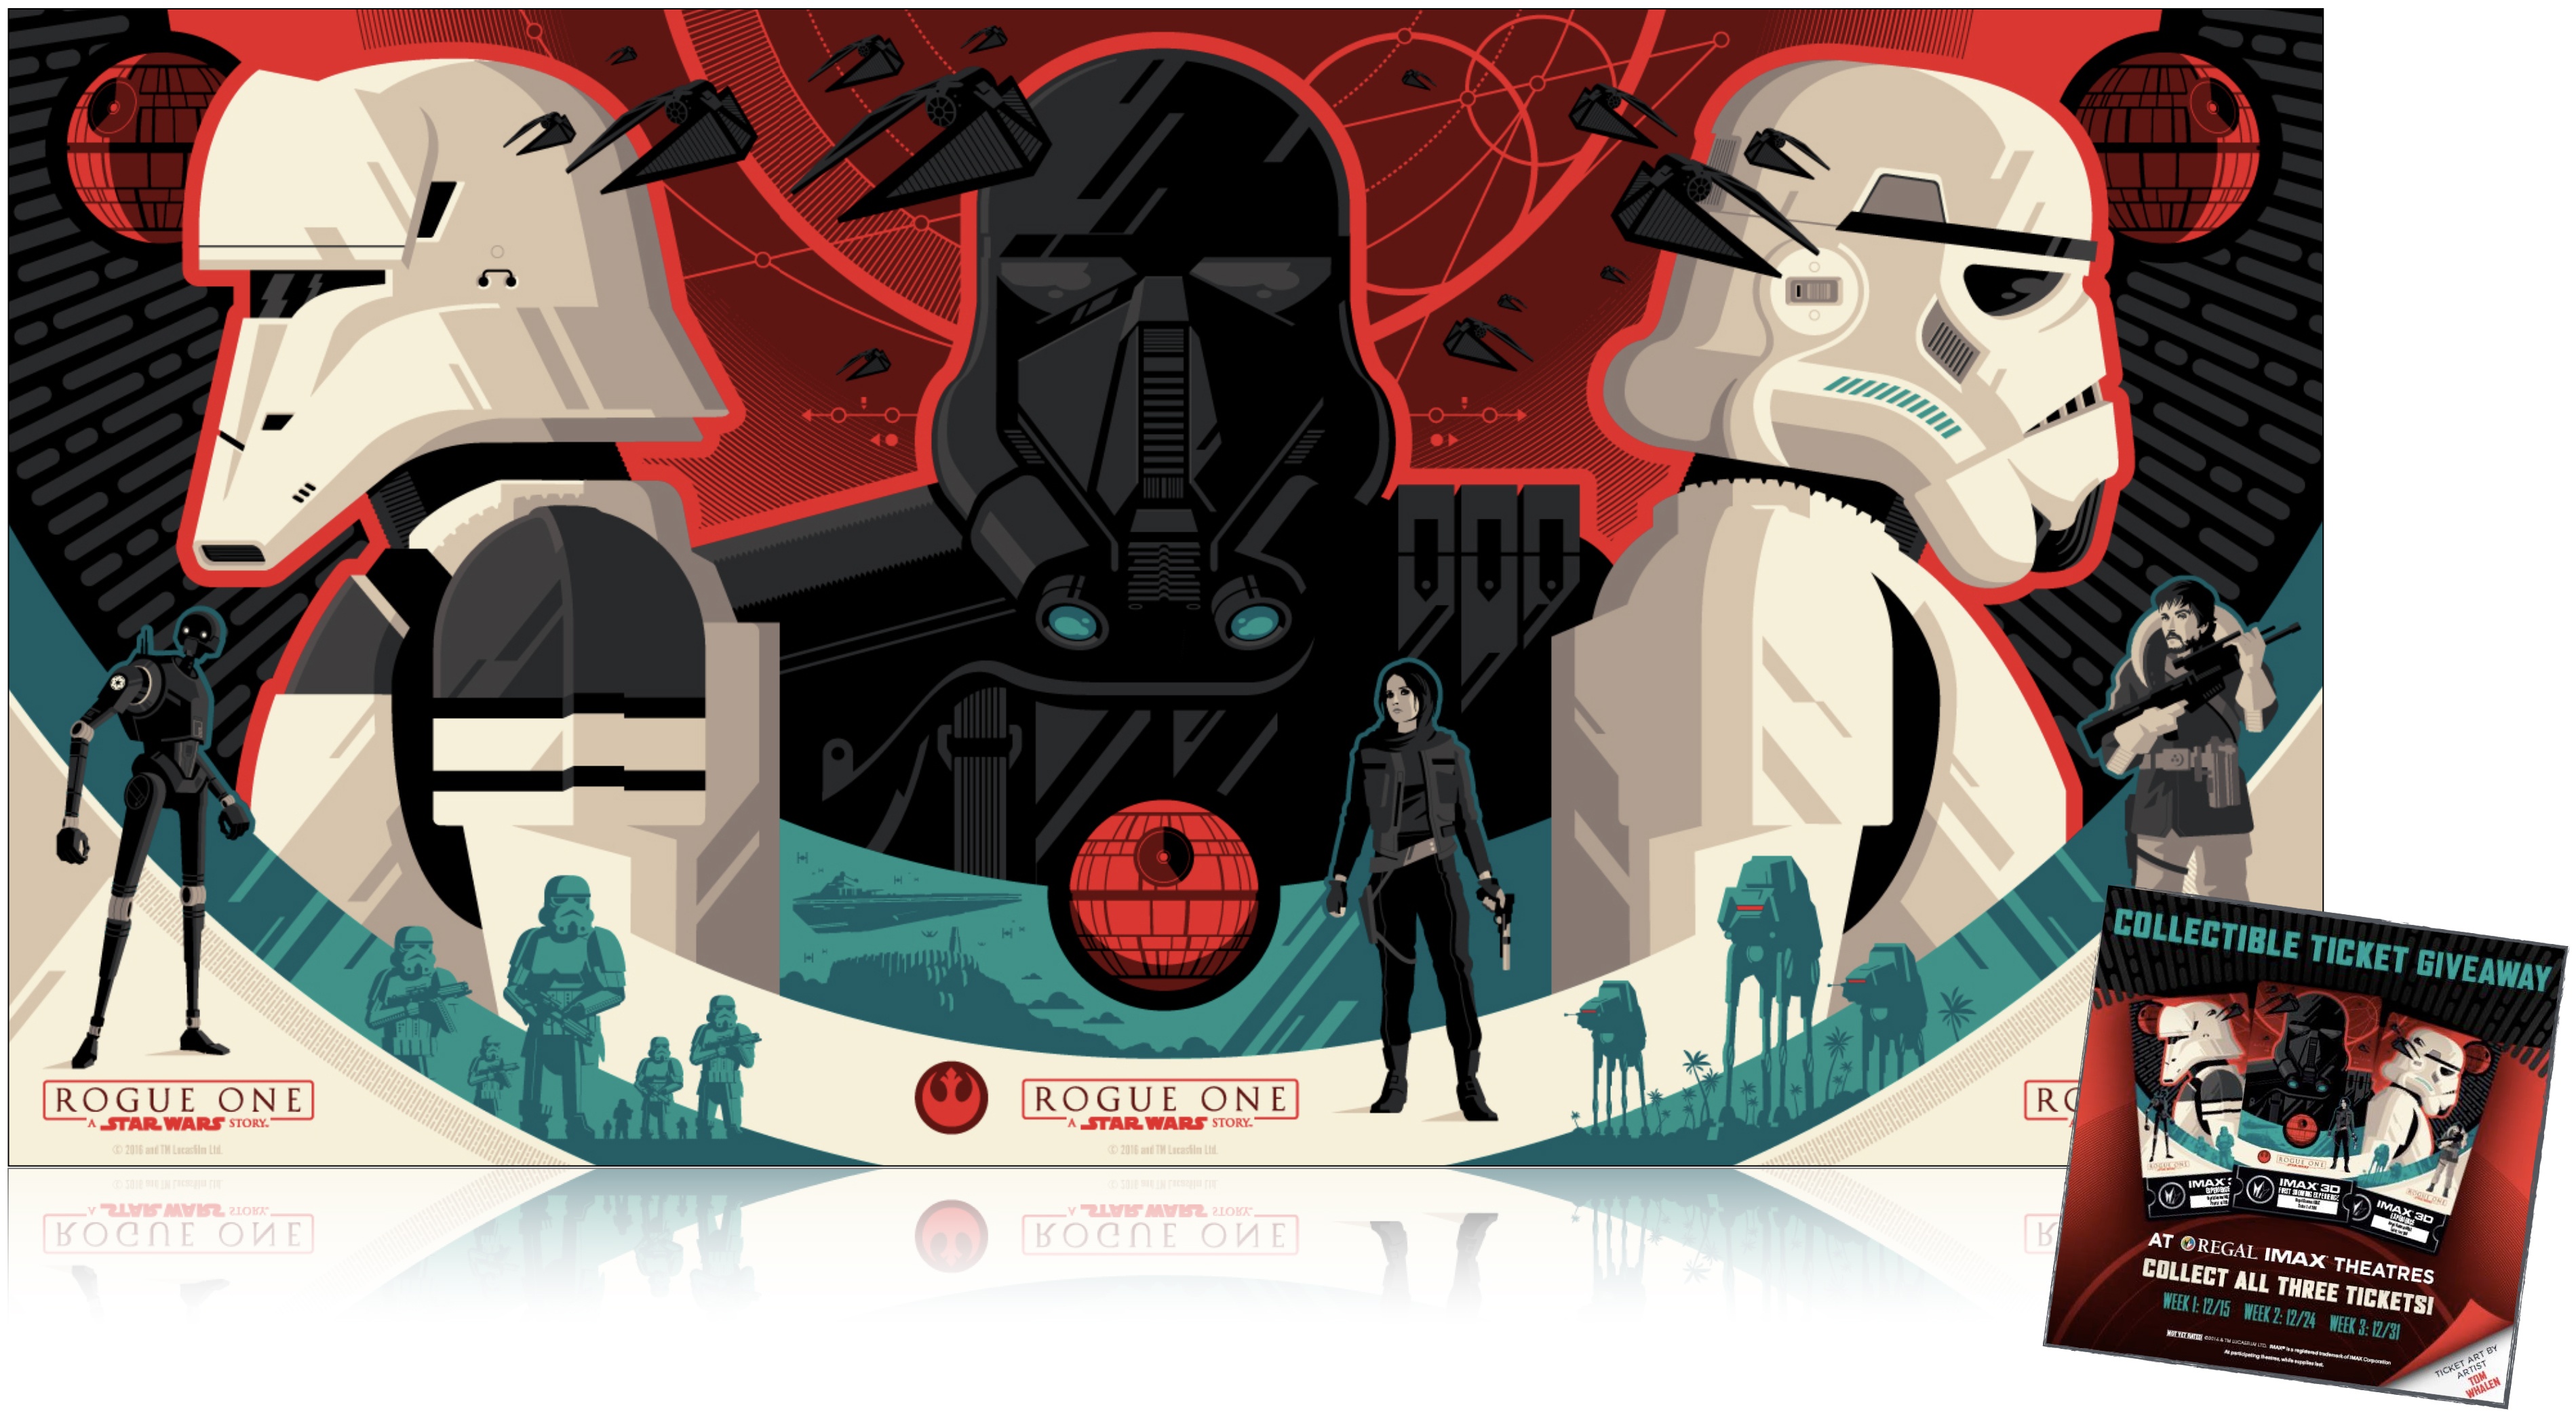 Rogue One - Special Edition IMAX Posters  - NYX Awards Winner 